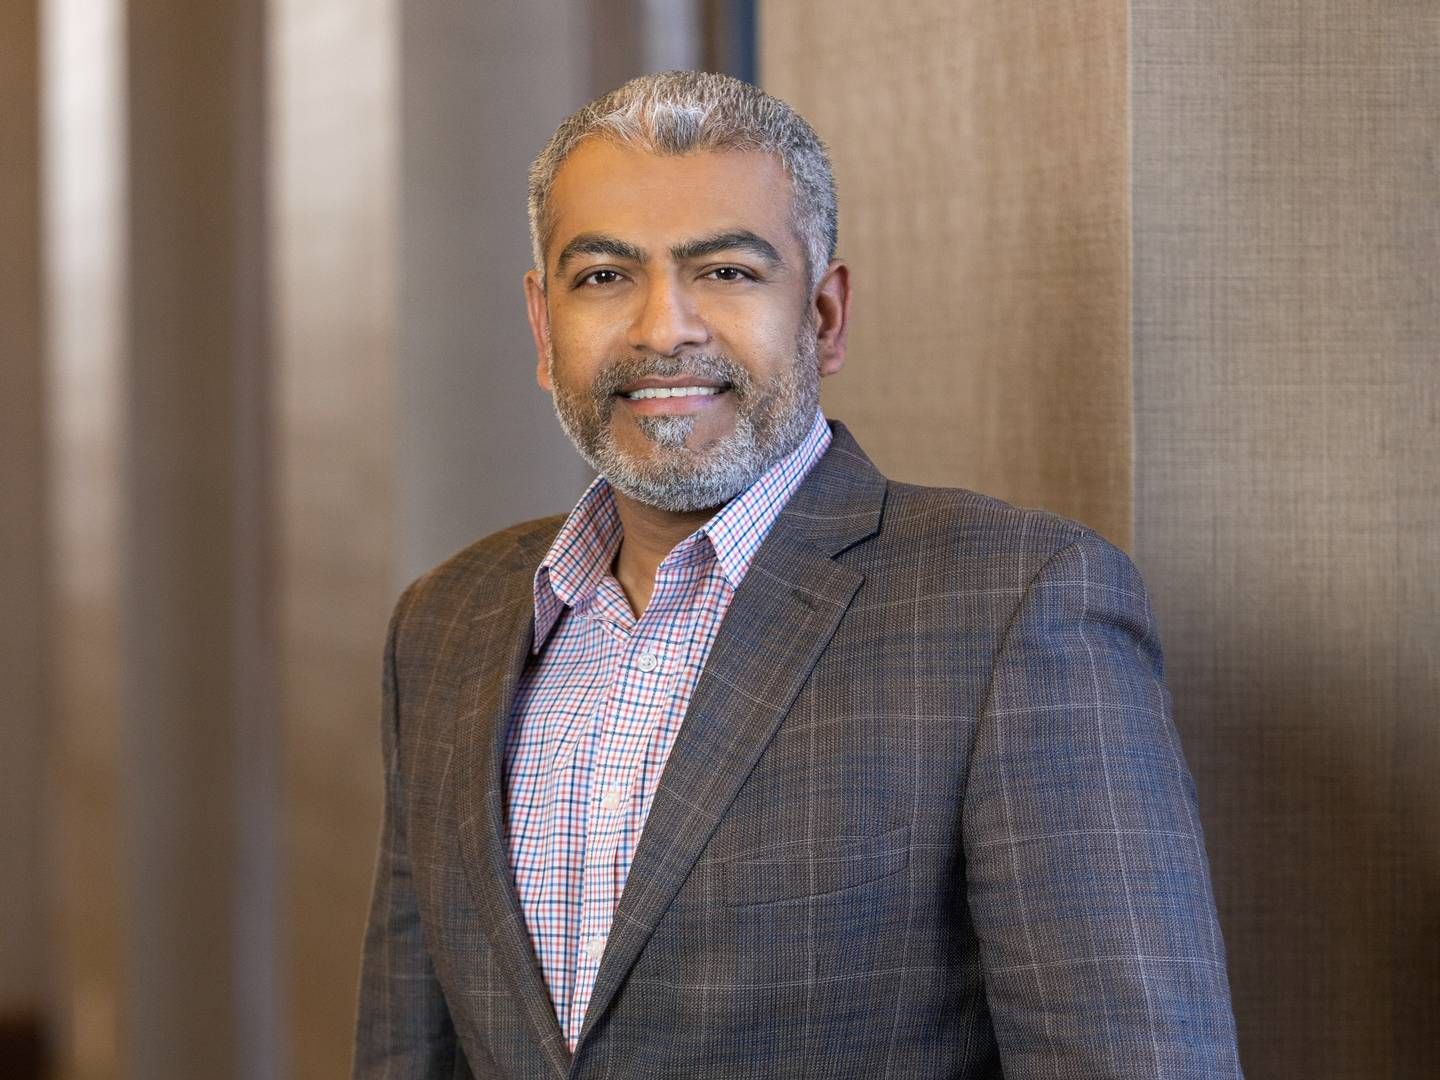 Sri Laxmana, vice president of US logistics company C.H. Robinson, is preparing for more companies to look for new ways to avoid supply chain turmoil. | Photo: C.h. Robinson / Pr